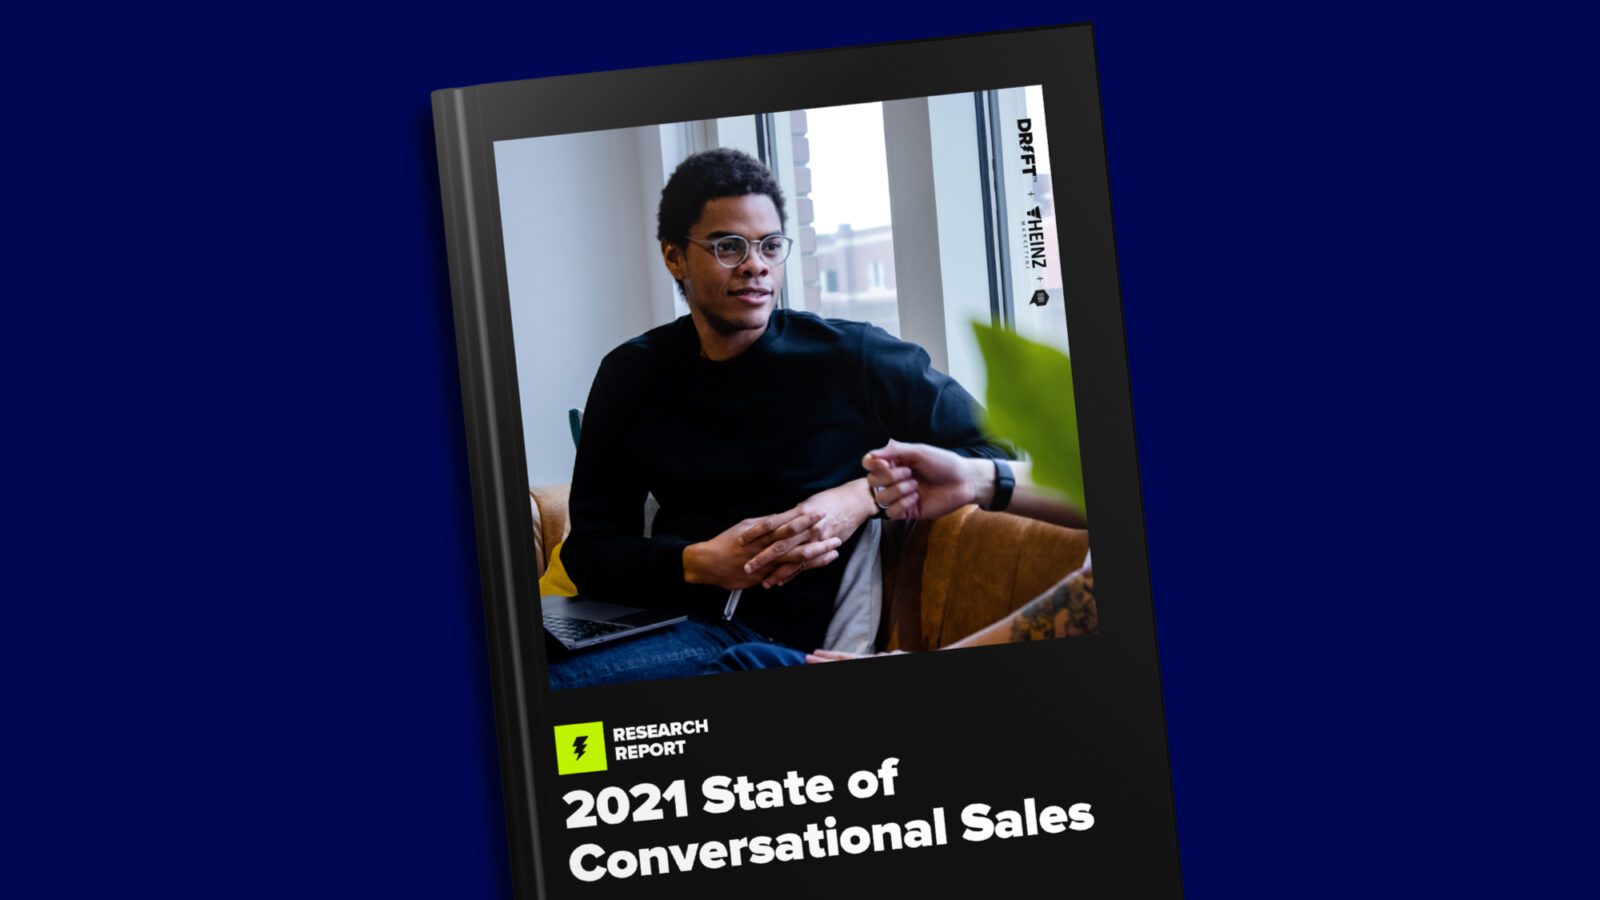 [REPORT] Selling in a Digital First World: The 2021 State of Conversational Sales